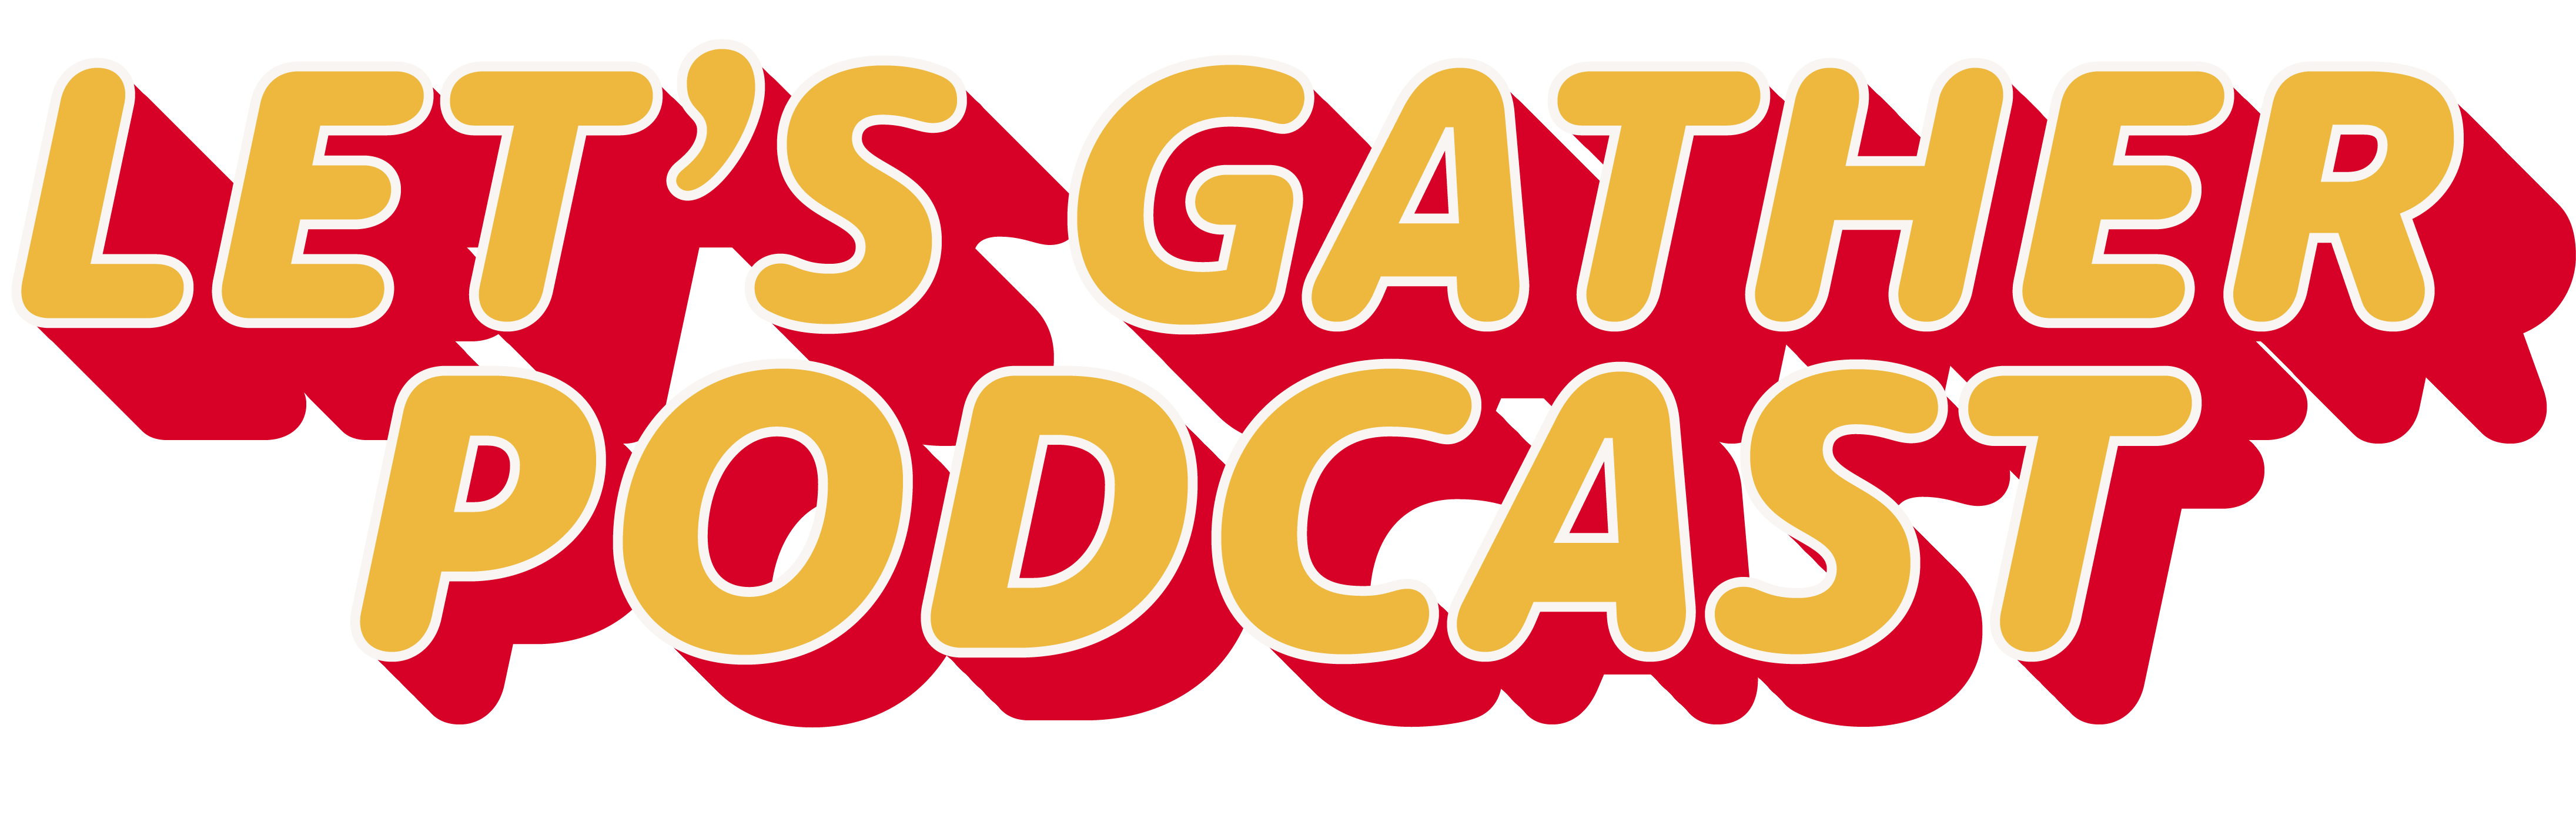 Let’s Gather Podcast